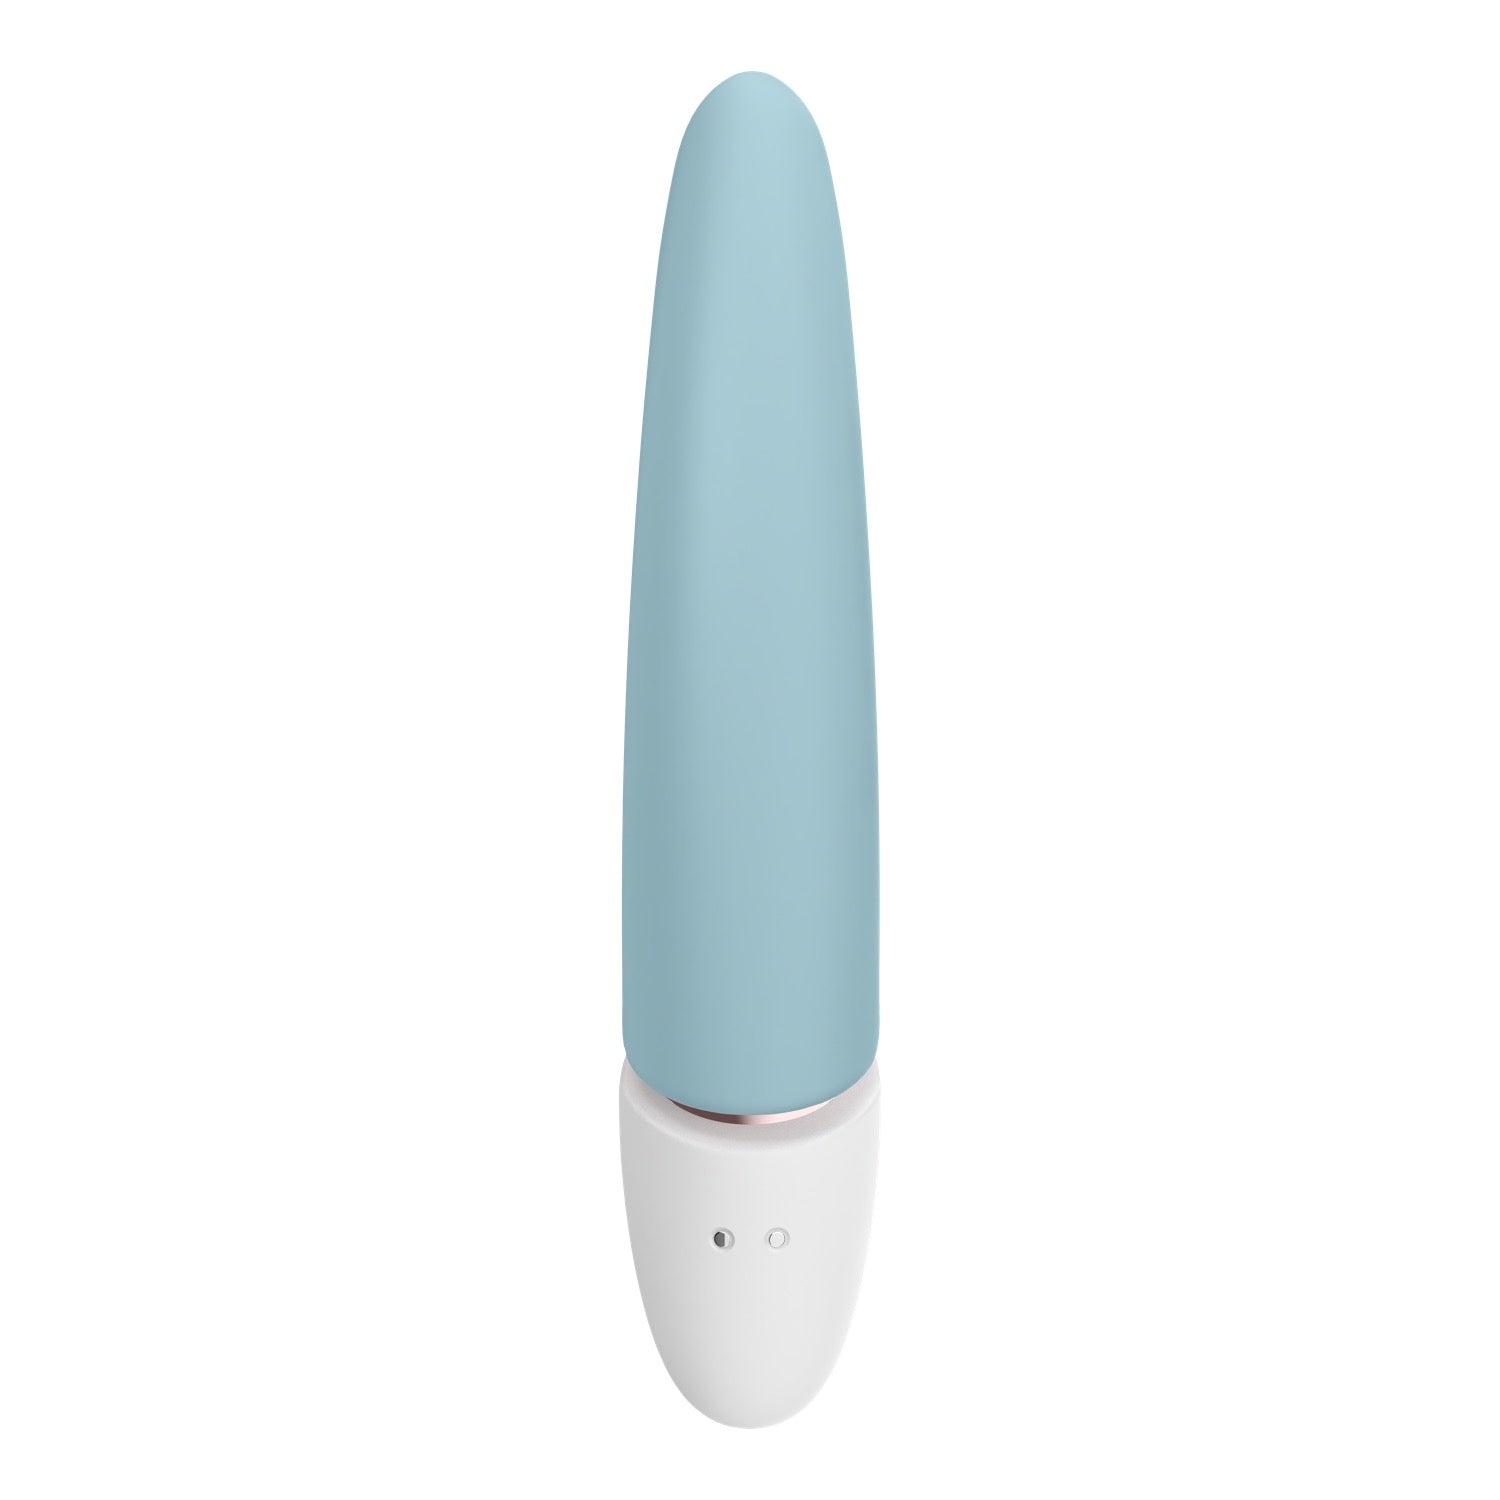 Satisfyer Marvelous Four - Coloured by Satisfyer